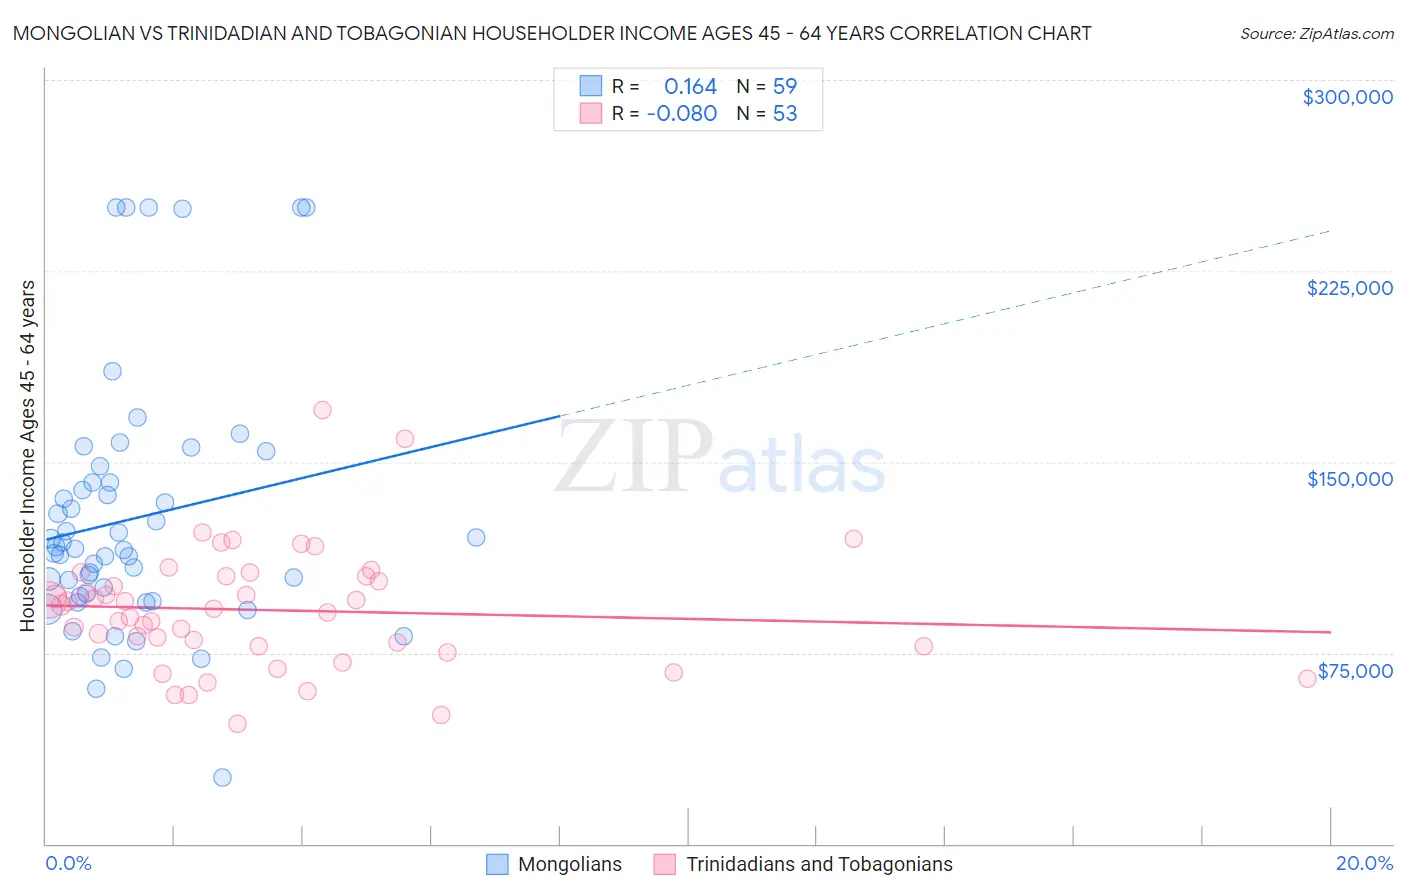 Mongolian vs Trinidadian and Tobagonian Householder Income Ages 45 - 64 years